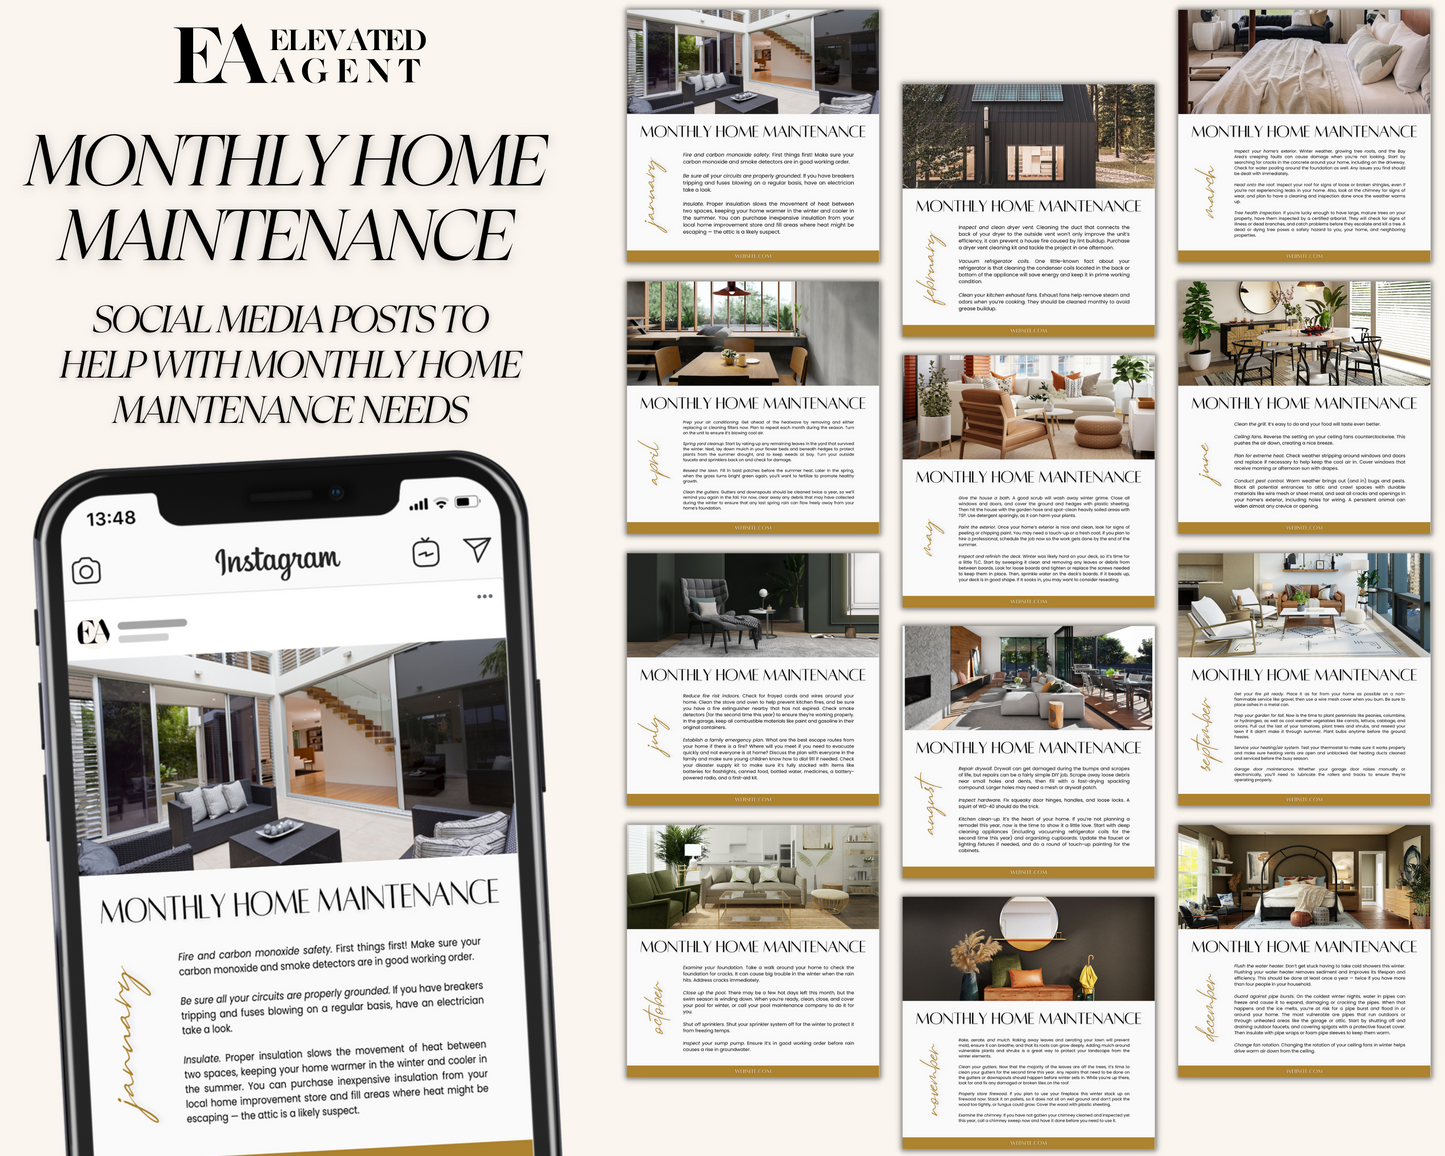 Home Maintenance Monthly Posts - Exclusive Brand